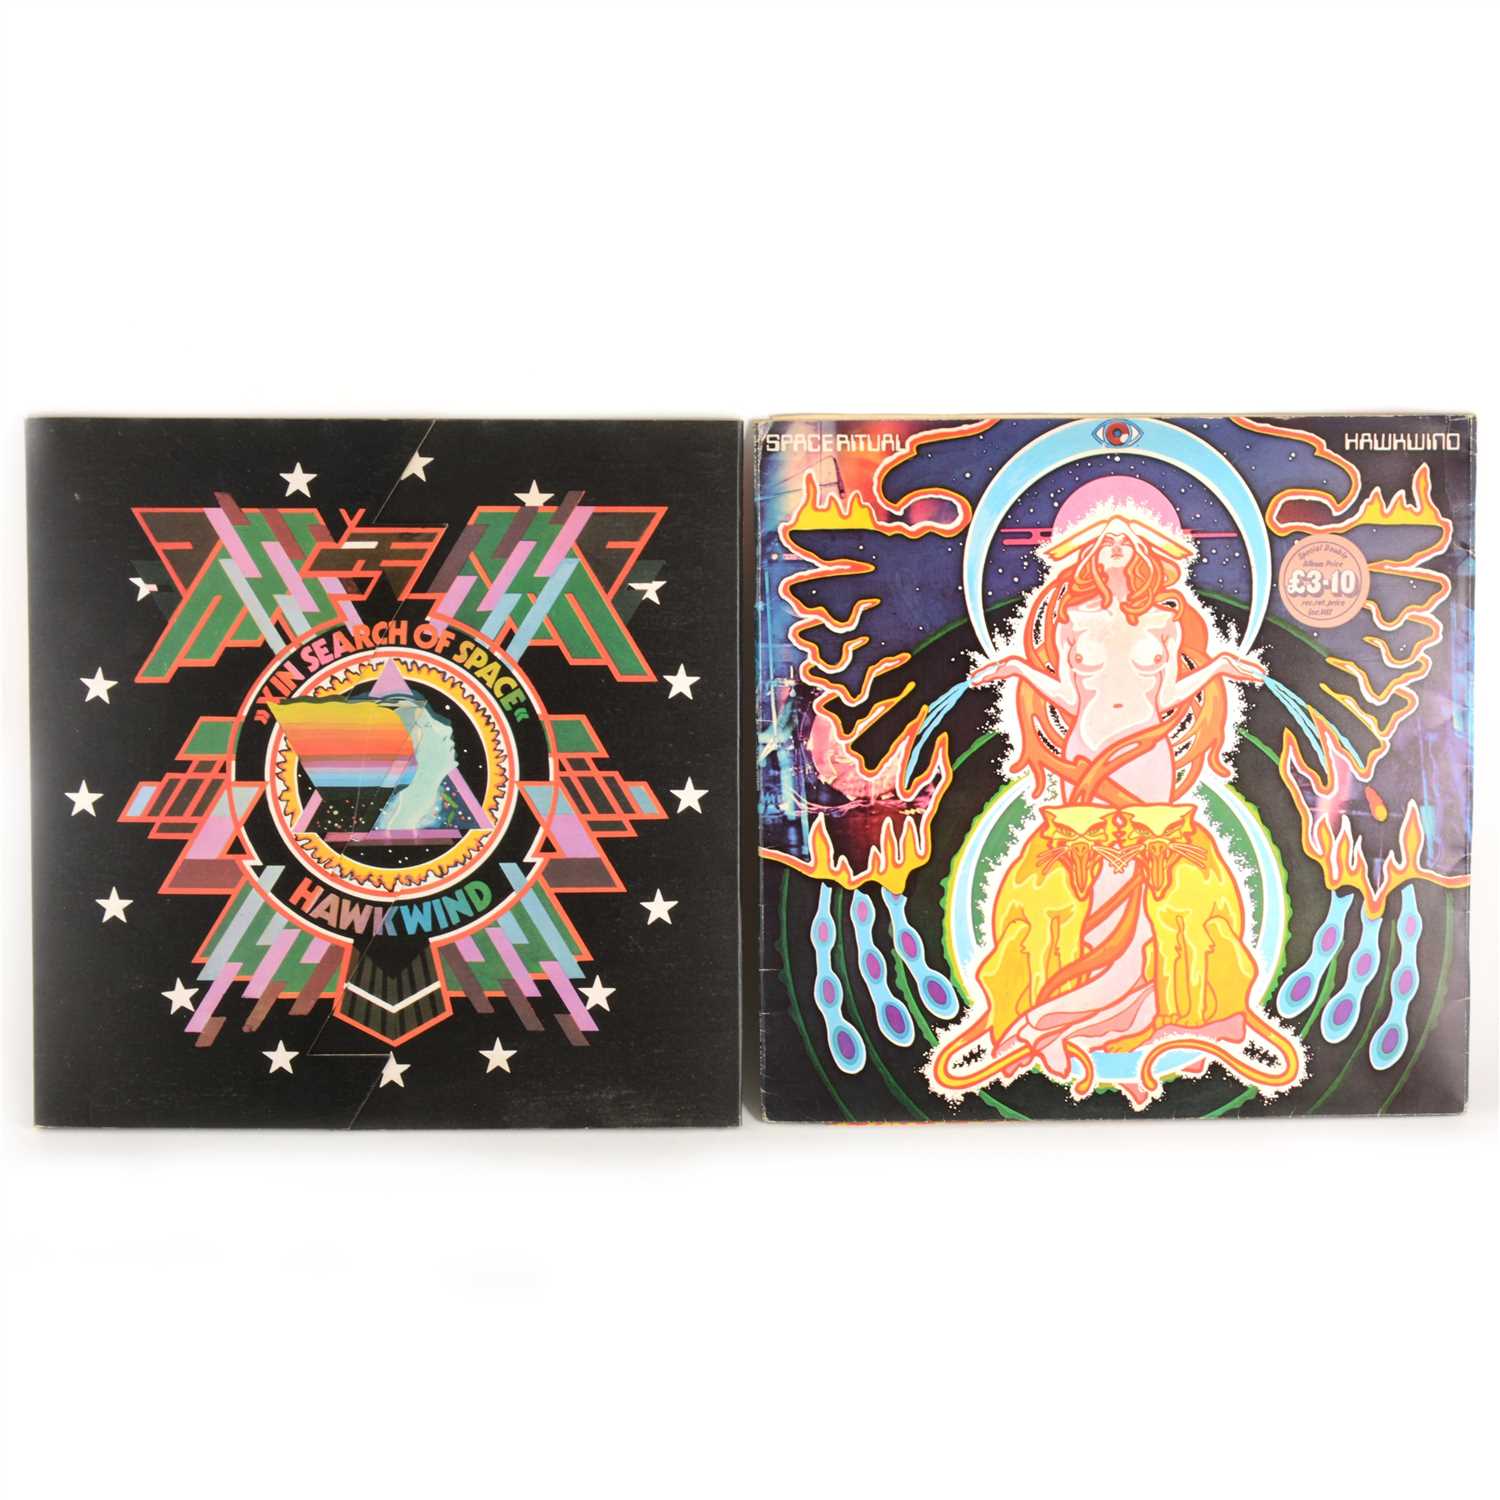 Lot 667 - Hawkwind; Two vinyl LP records, In Search of Space and The Space Ritual.